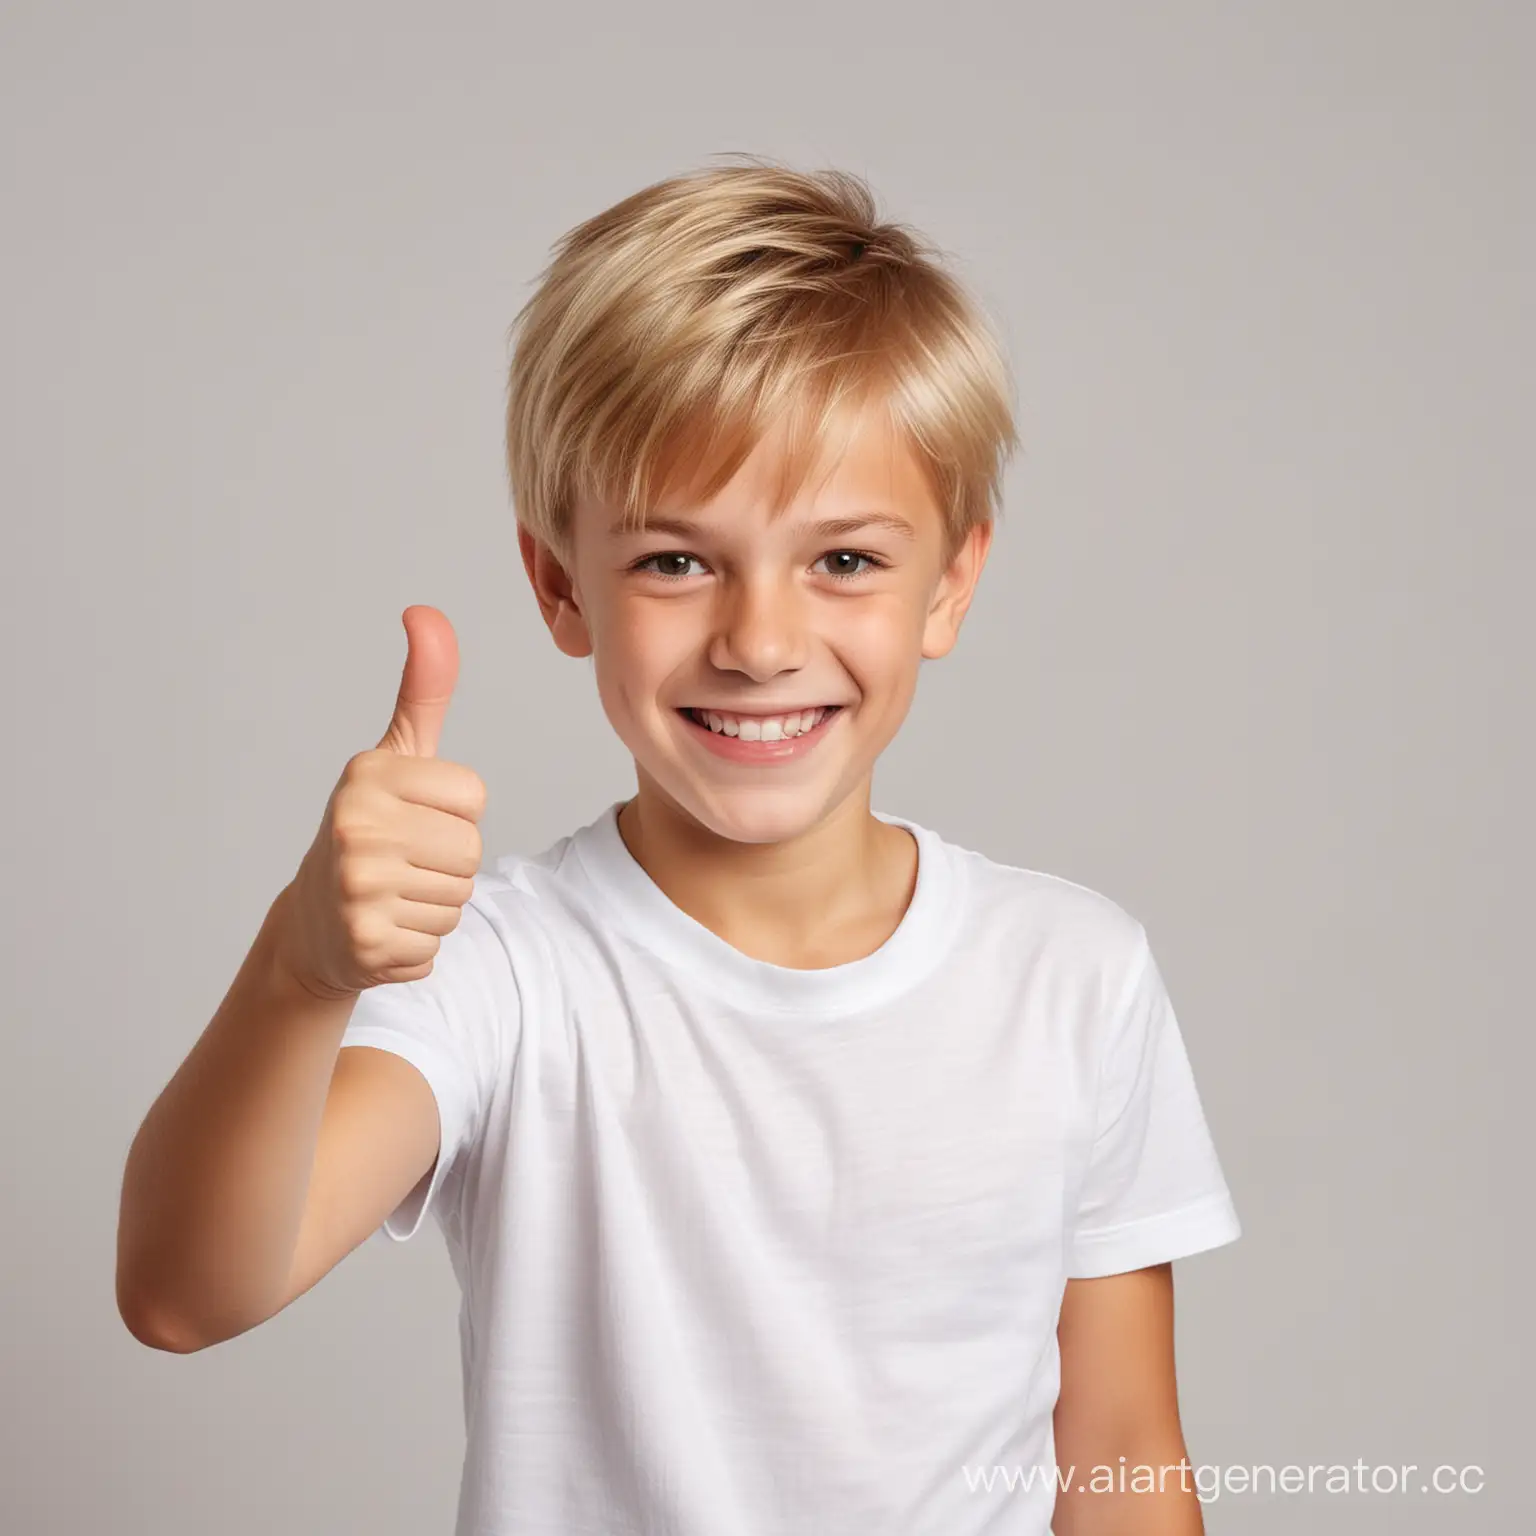 Blond-Boy-in-White-TShirt-Gives-Enthusiastic-Thumbs-Up